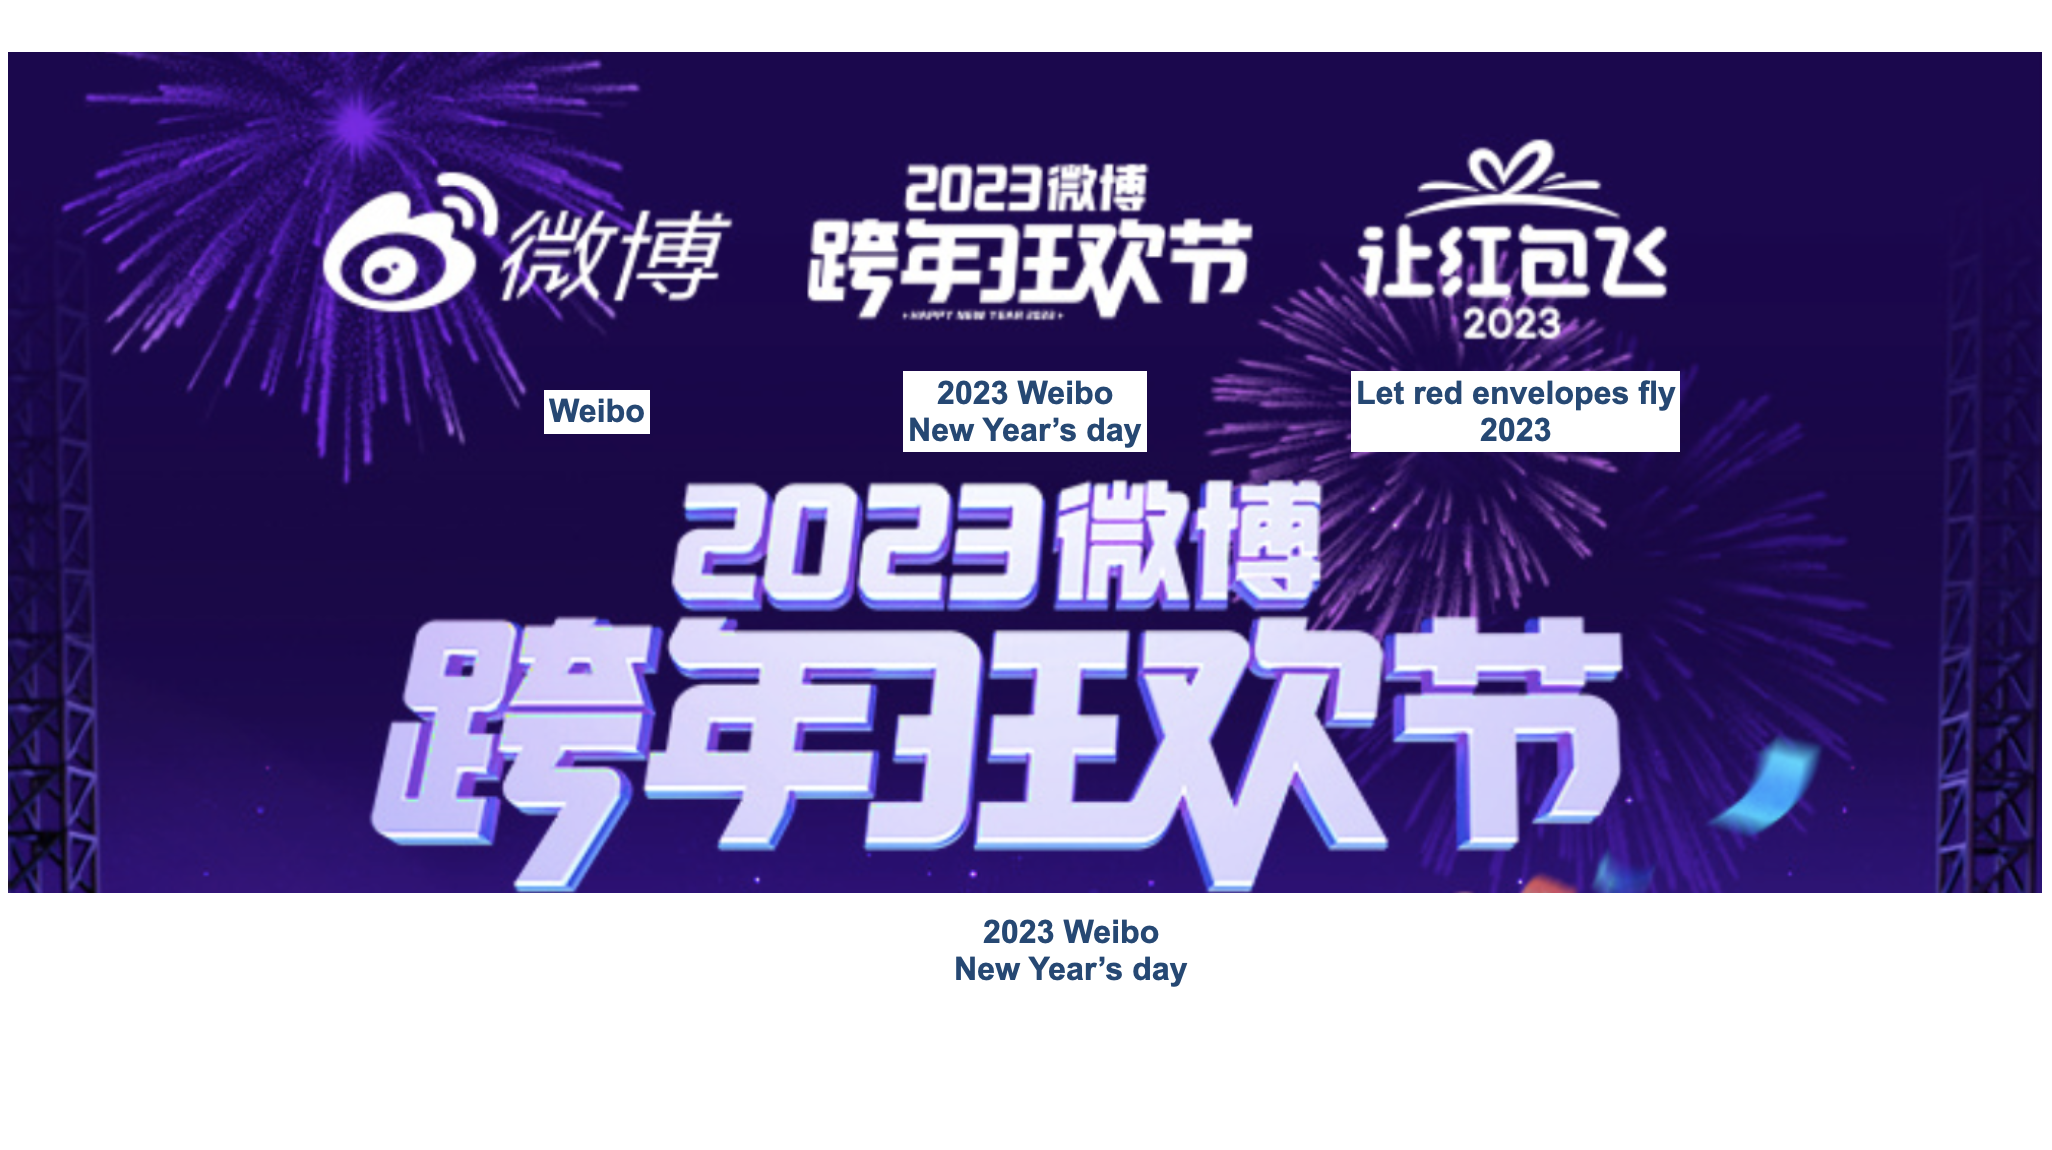 Weibo’s campaign for New Year’s Eve 2023